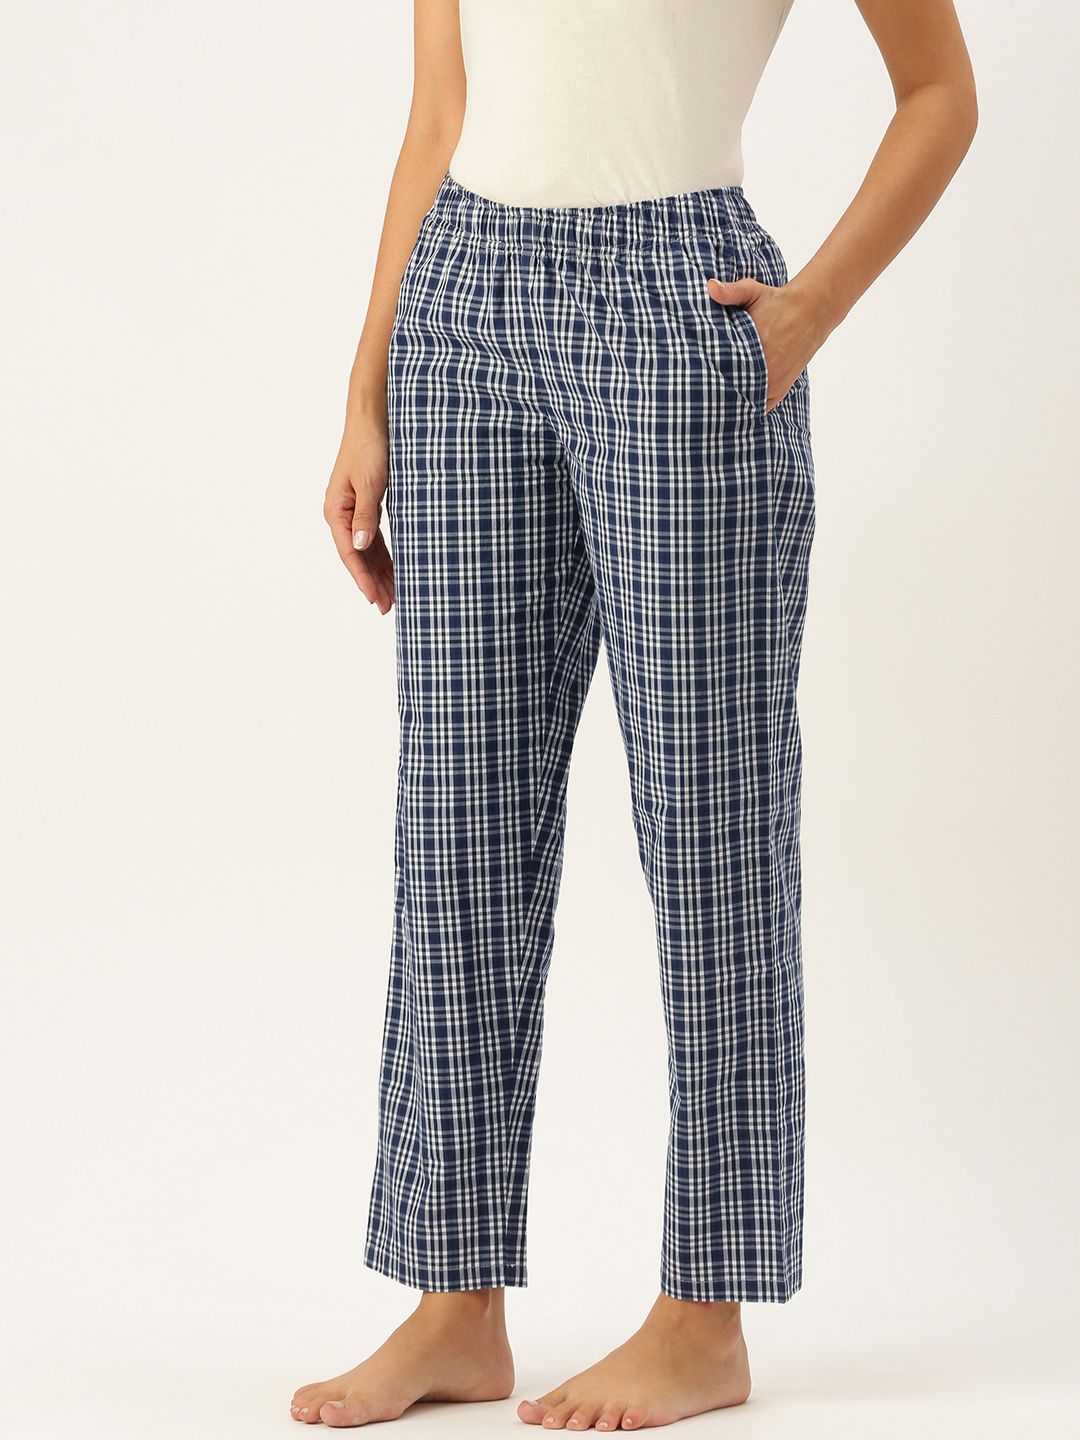 Clt.s Women Blue Checked Cotton Lounge Pants Price in India